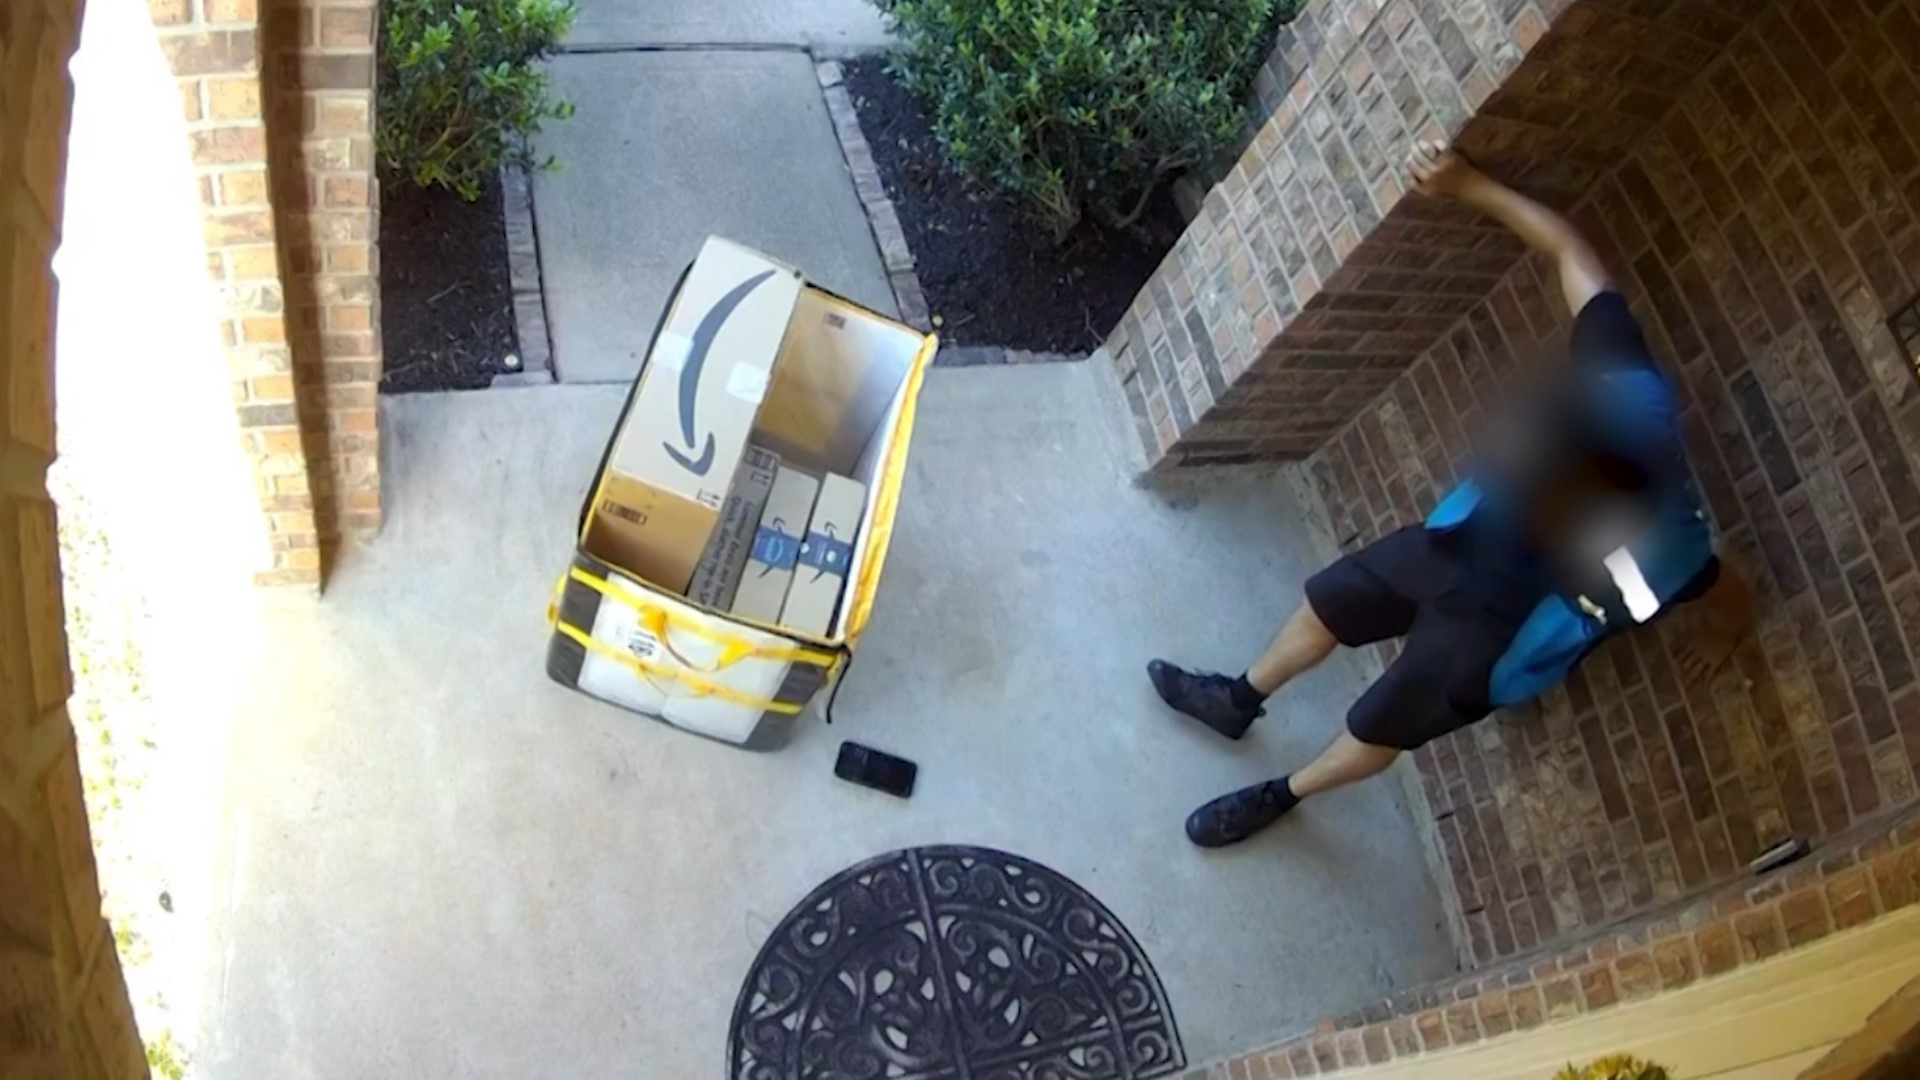 A number of delivery drivers said they can relate to a video showing a worker falling out on a family's front porch.